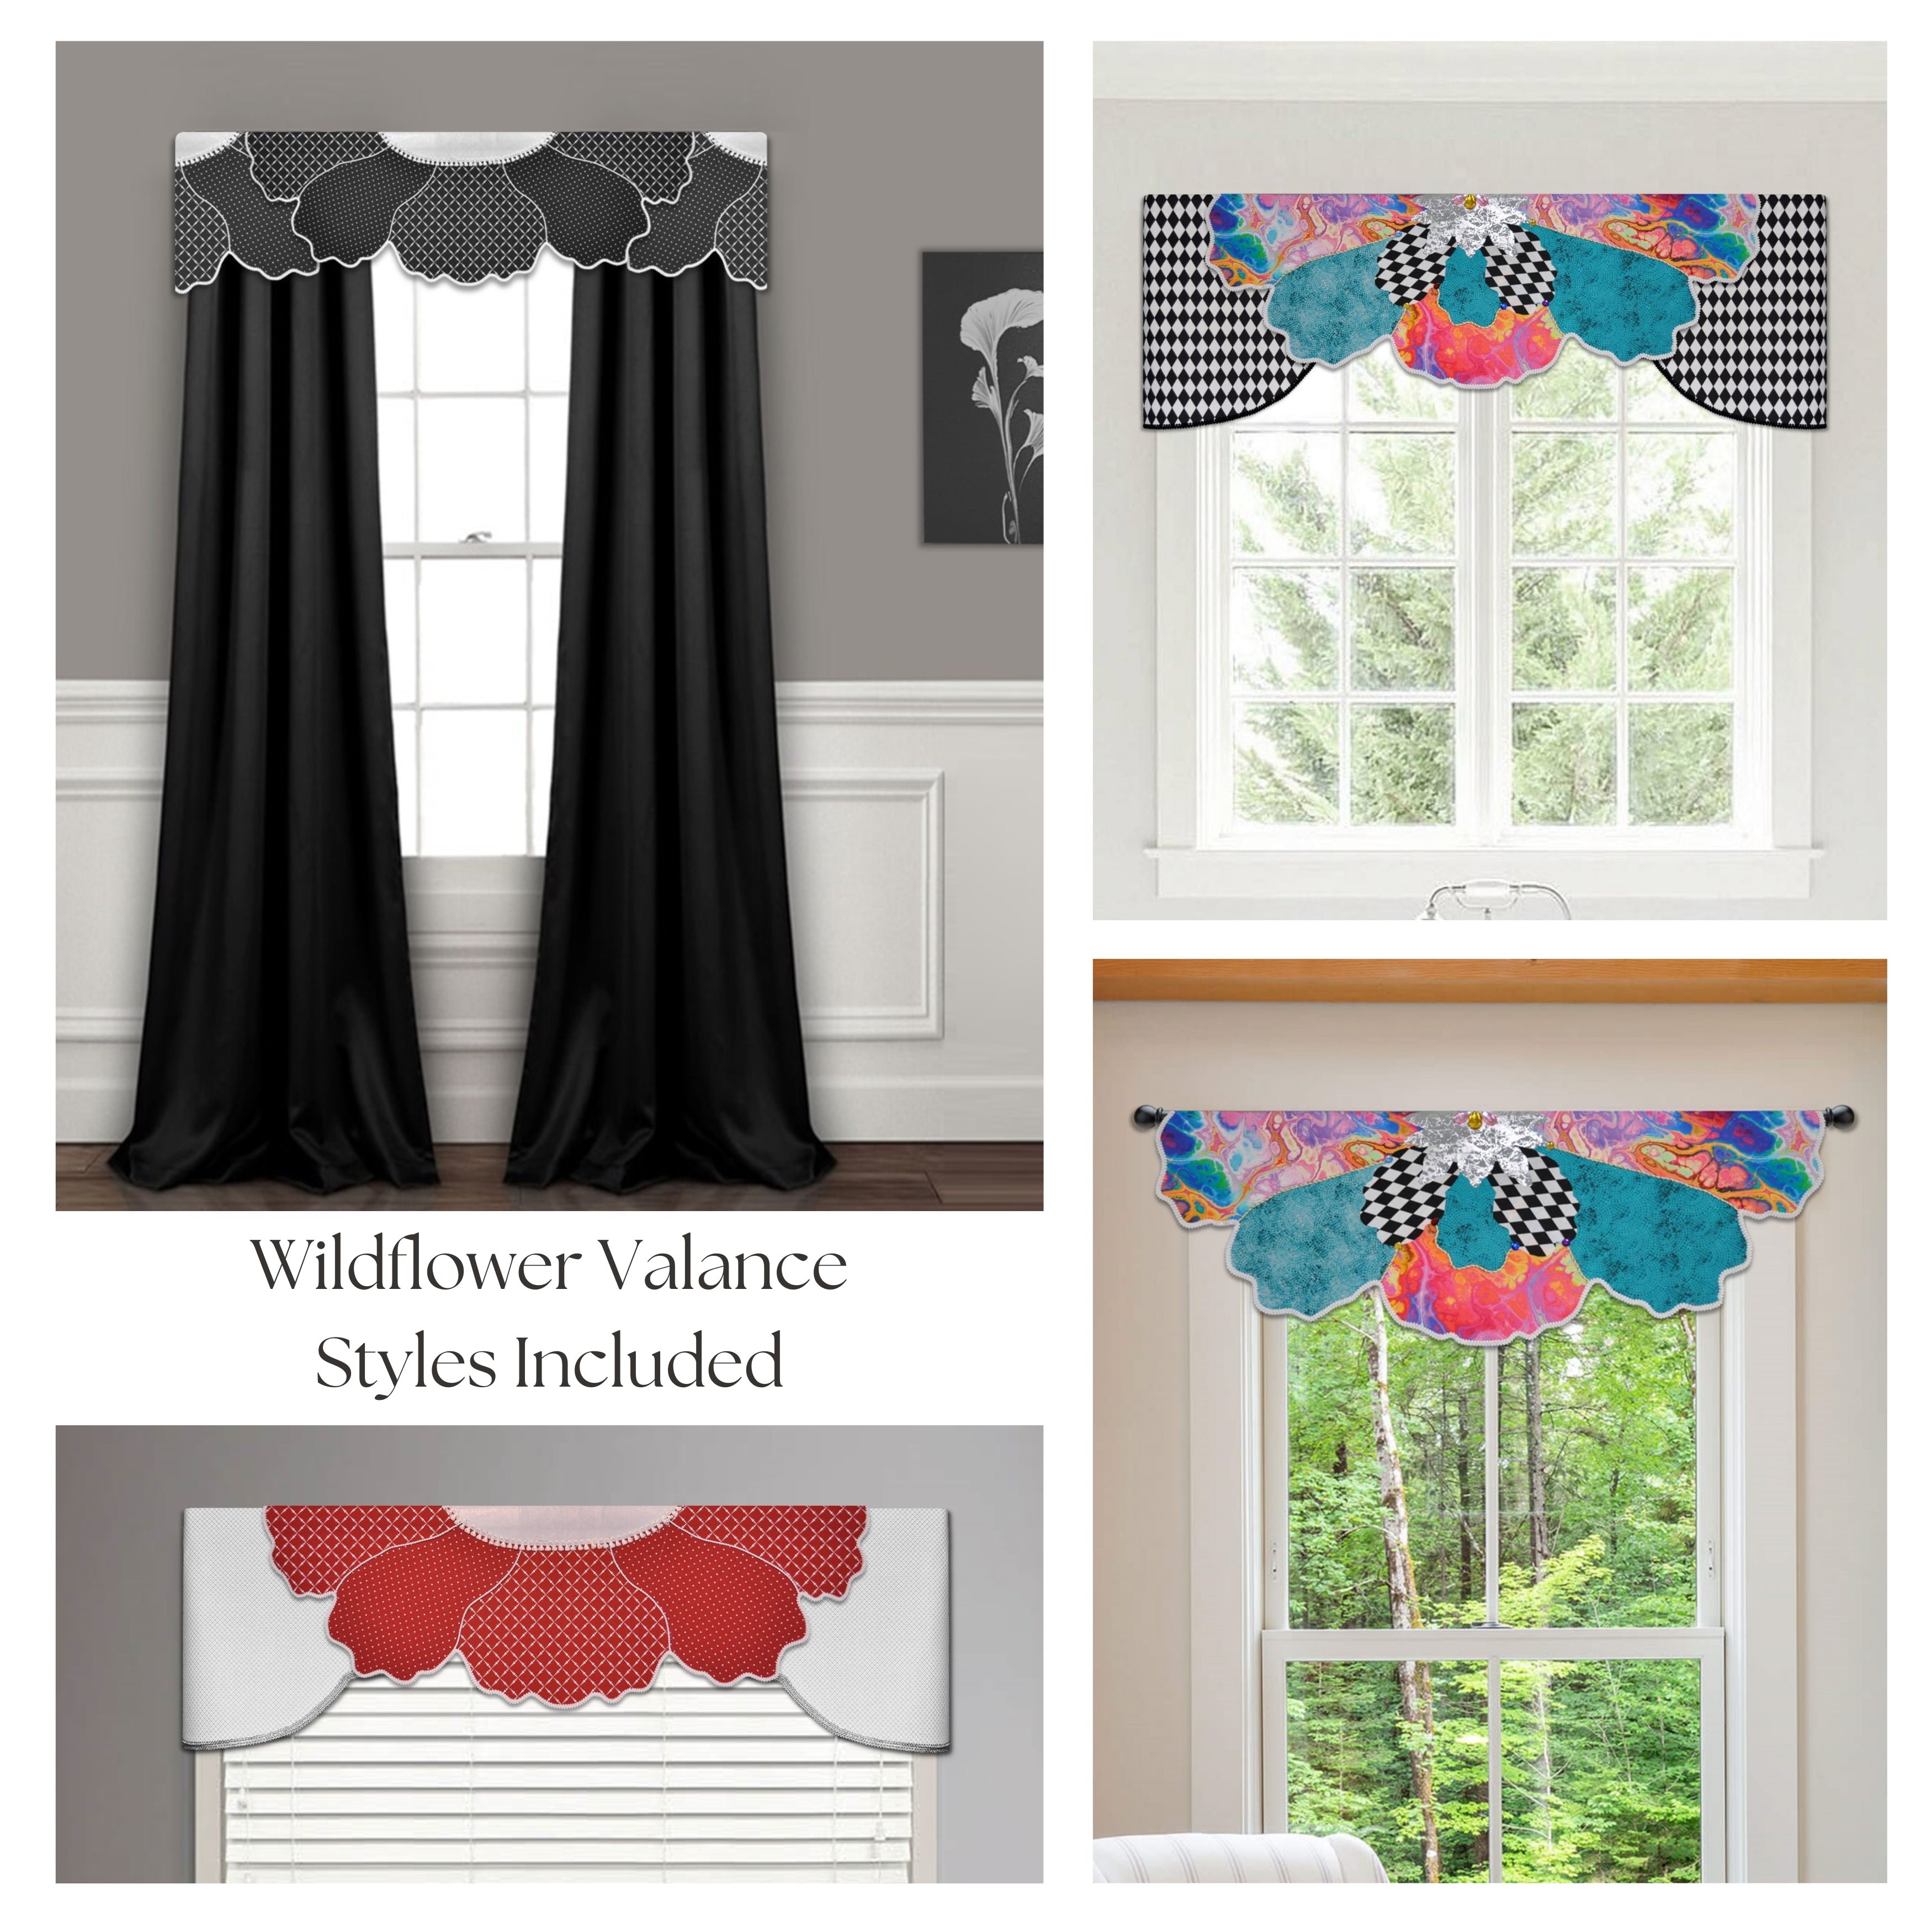 Traceable Designer Pleated Swag Valance Curtain Kit, Reusable, No